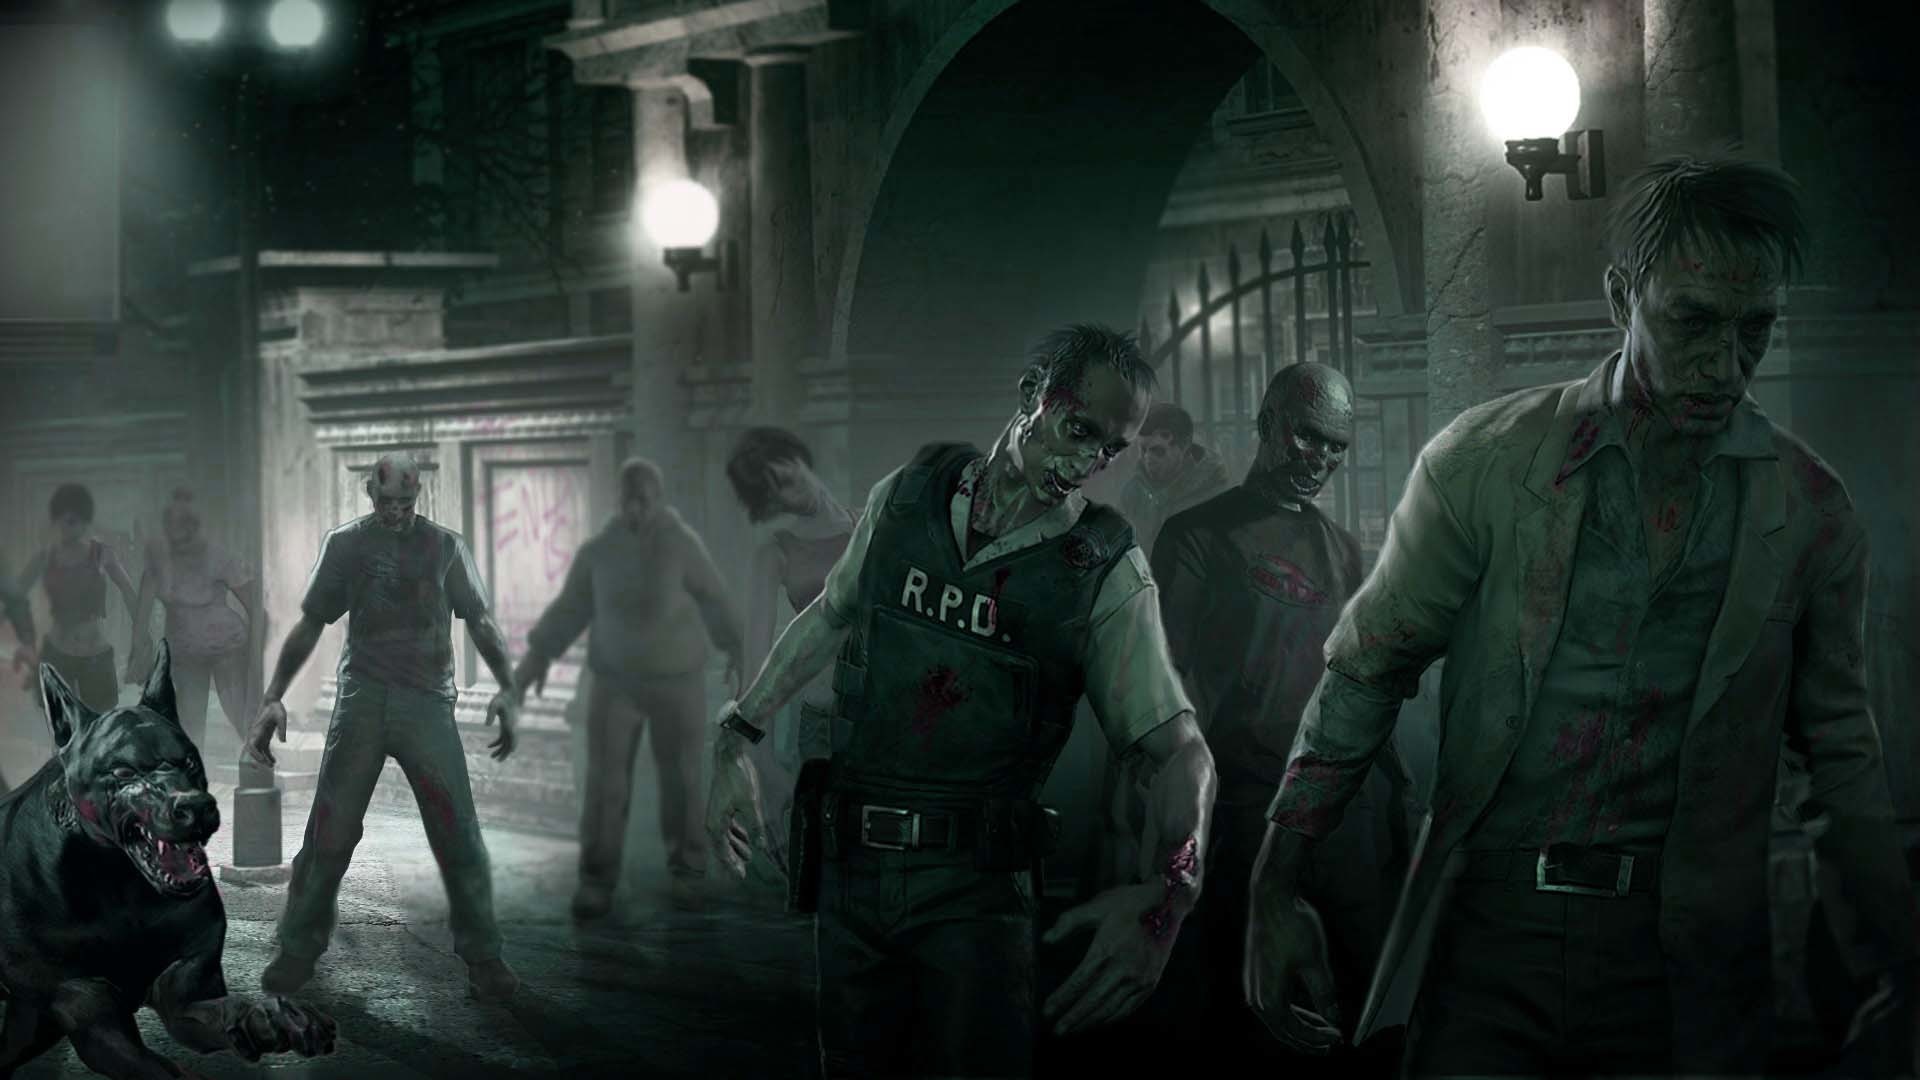 1920x1080 High Resolution Zombie Wallpaper for PC Full Size - SiWallpaperHD .